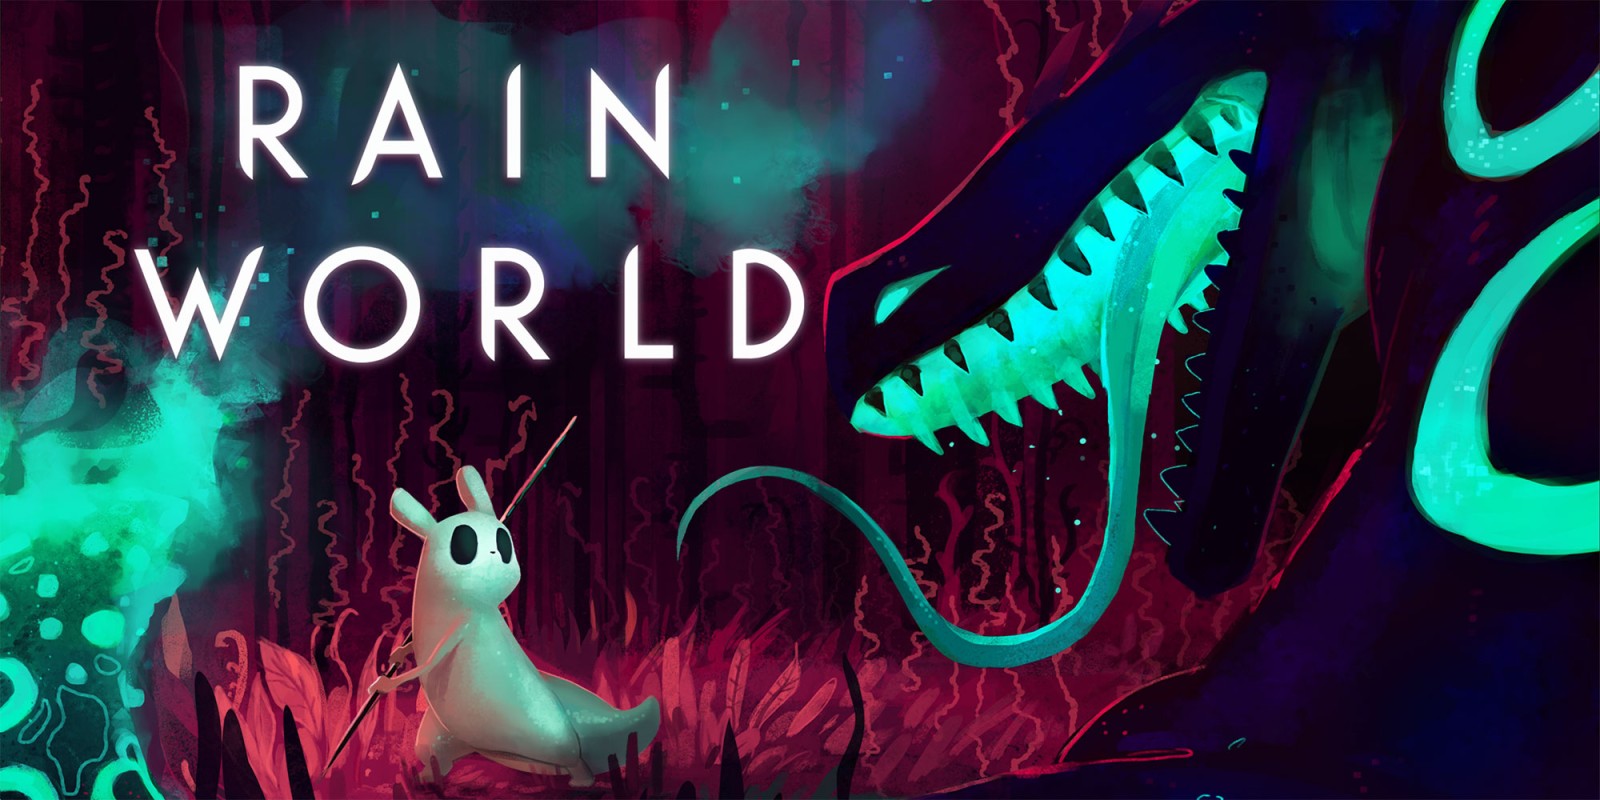 Rain World PC Game Download For Free